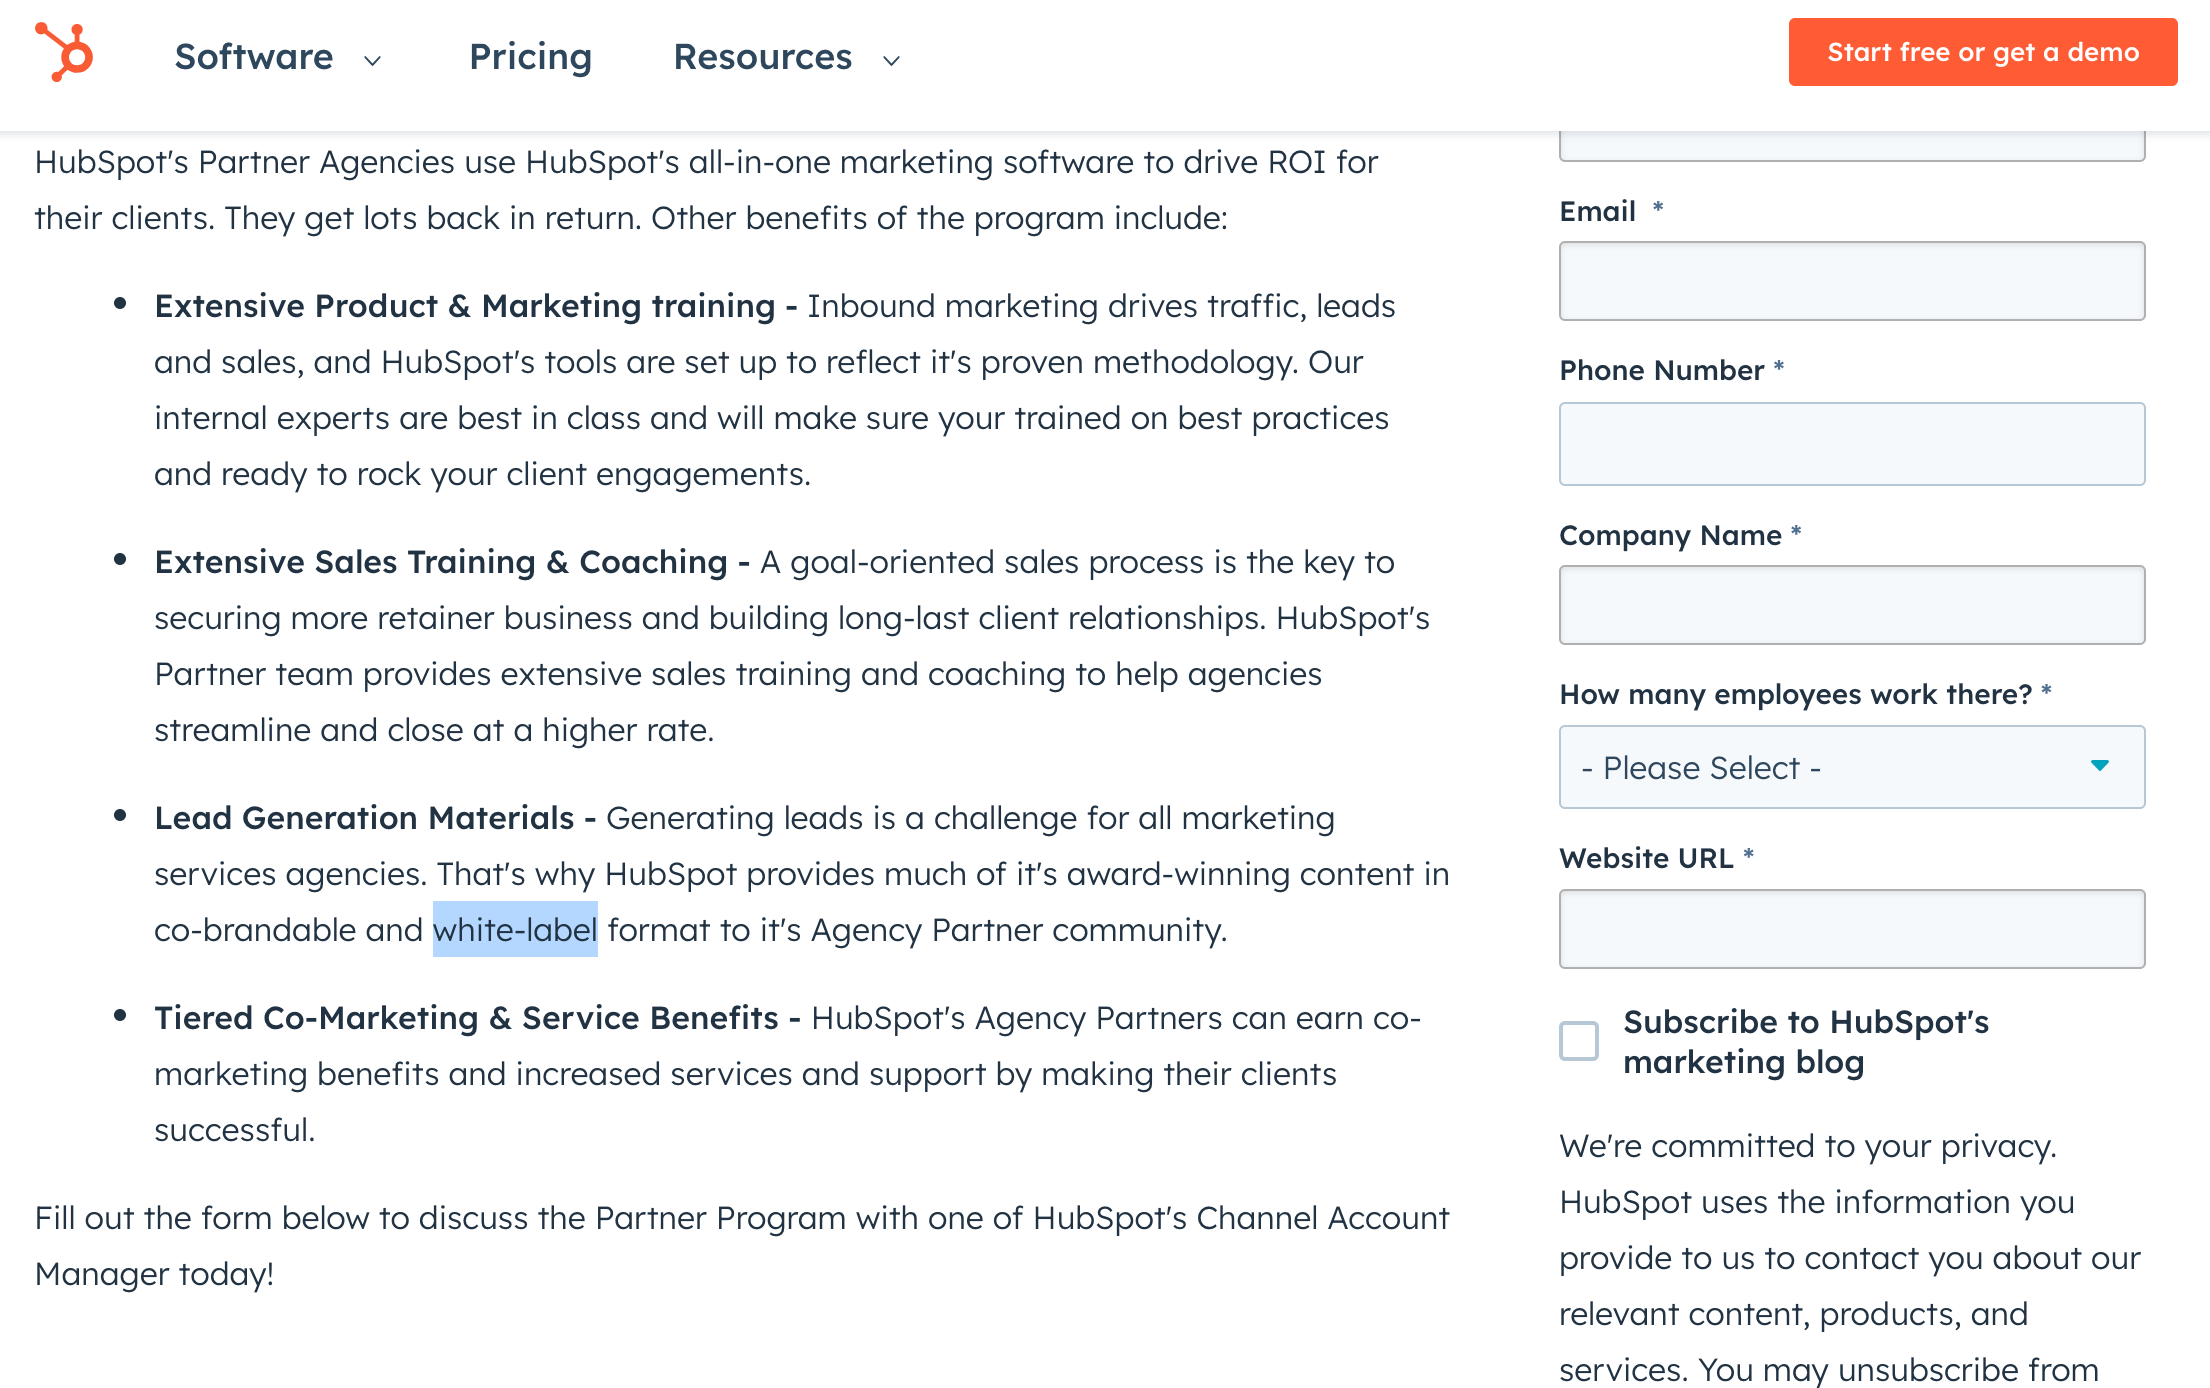 hubspot white label services for call tracking firms